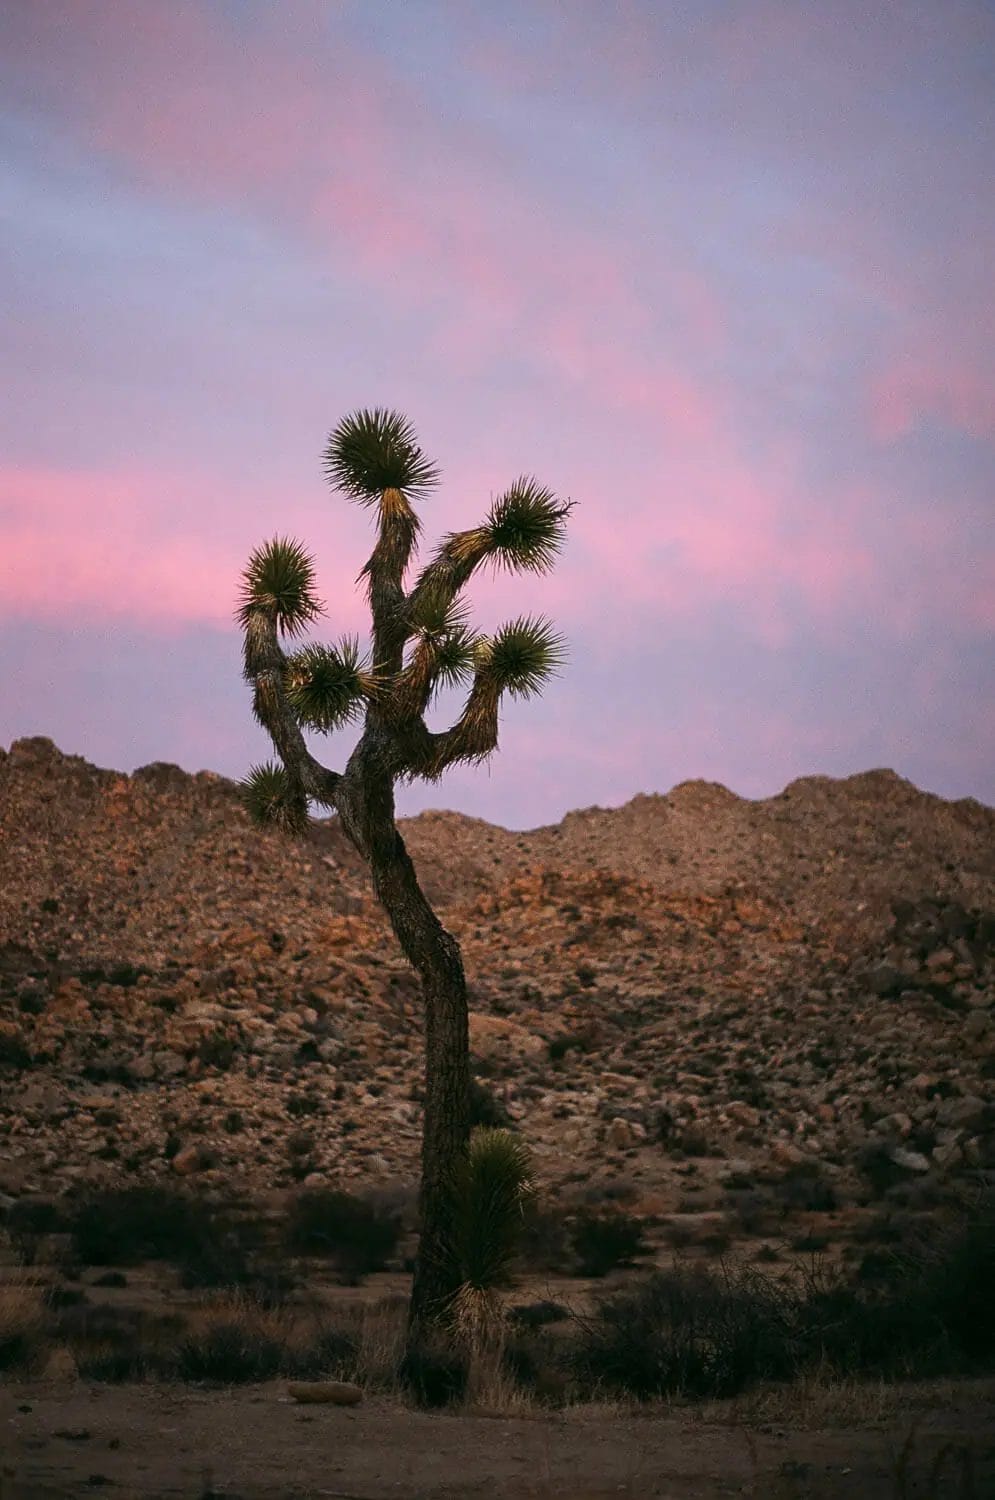 A solitary joshua tree stands against a dusk sky with pink clouds and a rugged mountain backdrop.